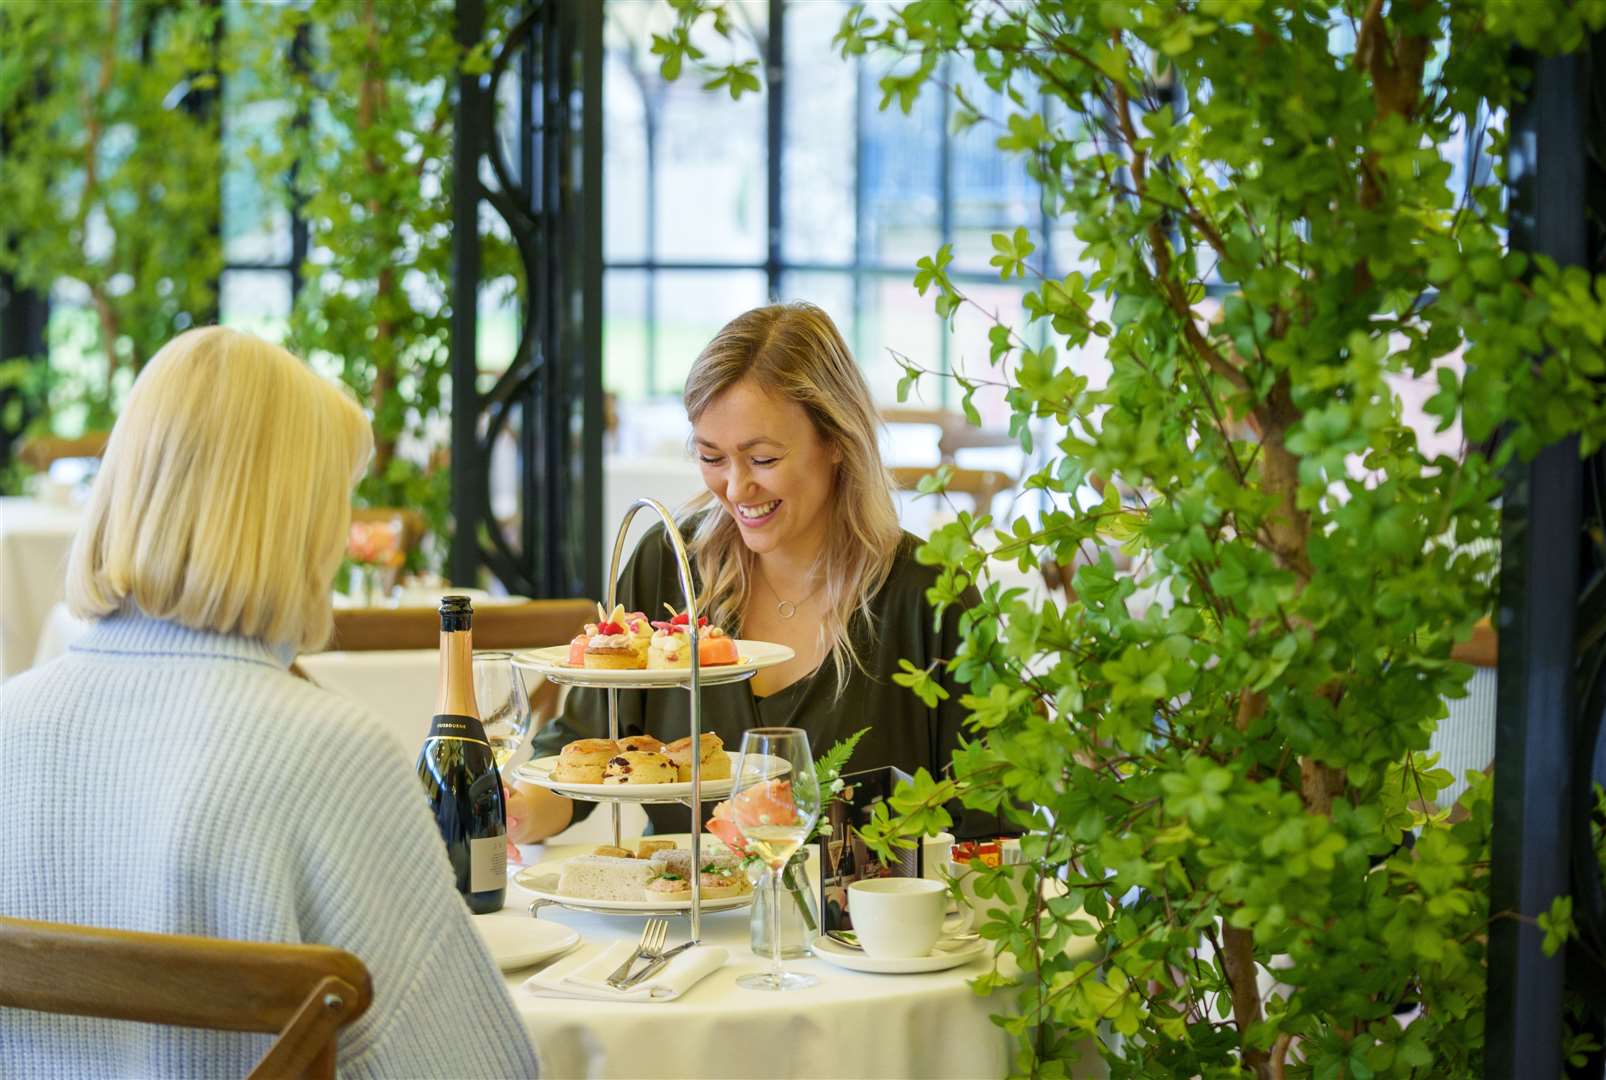 The afternoon tea includes sweet and savoury snacks, entry to the park and a complimentary gift to take home. Picture: Aspinall Foundation